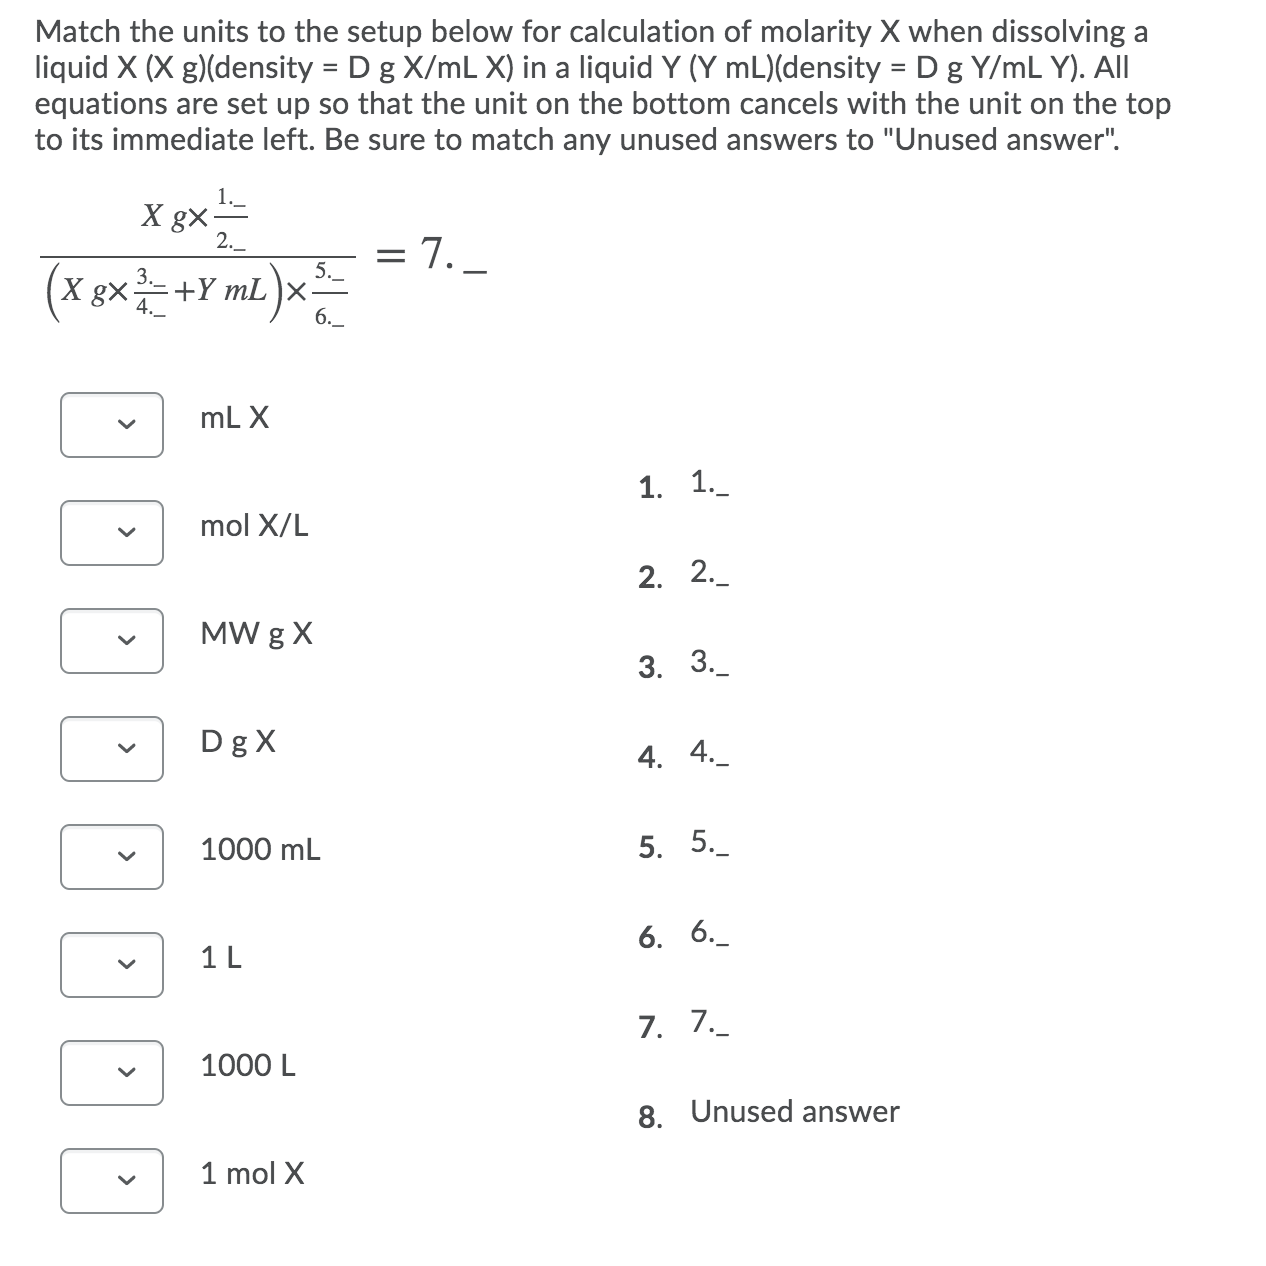 Match the units to the setup below for calculation of molarity X when dissolving a
liquid X (X g)(density = D g X/mL X) in a liquid Y (Y mL)(density = D g Y/mL Y). All
equations are set up so that the unit on the bottom cancels with the unit on the top
to its immediate left. Be sure to match any unused answers to "Unused answer".
X gx=
2._
= 7. _
1.-
5._
X gX
:+Y mL
6.
mL X
1. 1.
mol X/L
2. 2._
MW g X
3. 3.
Dg X
4. 4._
1000 mL
5. 5._
6. 6._
1 L
7. 7.
1000 L
8. Unused answer
1 mol X
>
>
>
>
>
>
>
